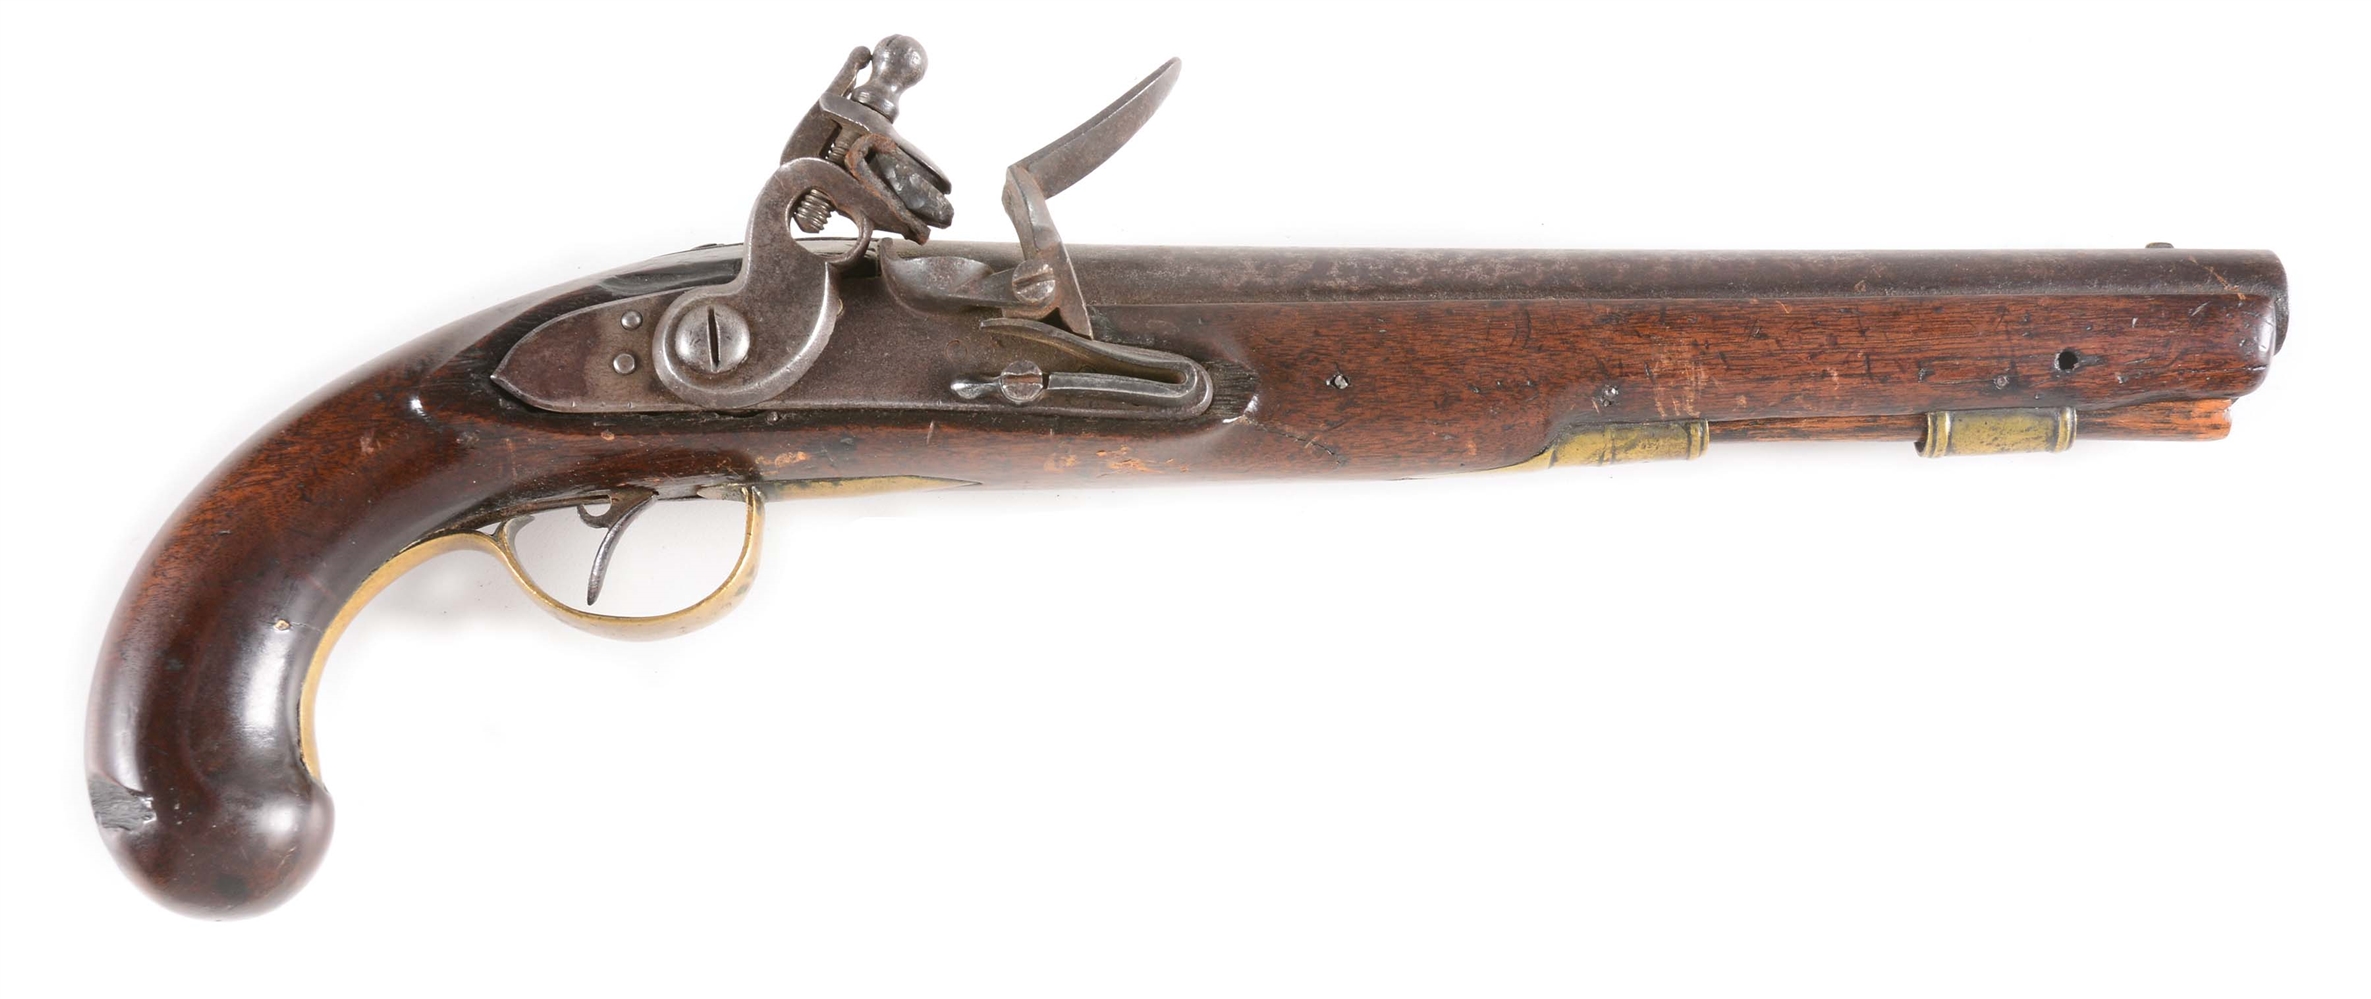 (A) AN 1813 (?) CONTRACT UNITED STATES FLINTLOCK MARTIAL PISTOL WITH BARREL MARKED DERINGER PHILA PA.